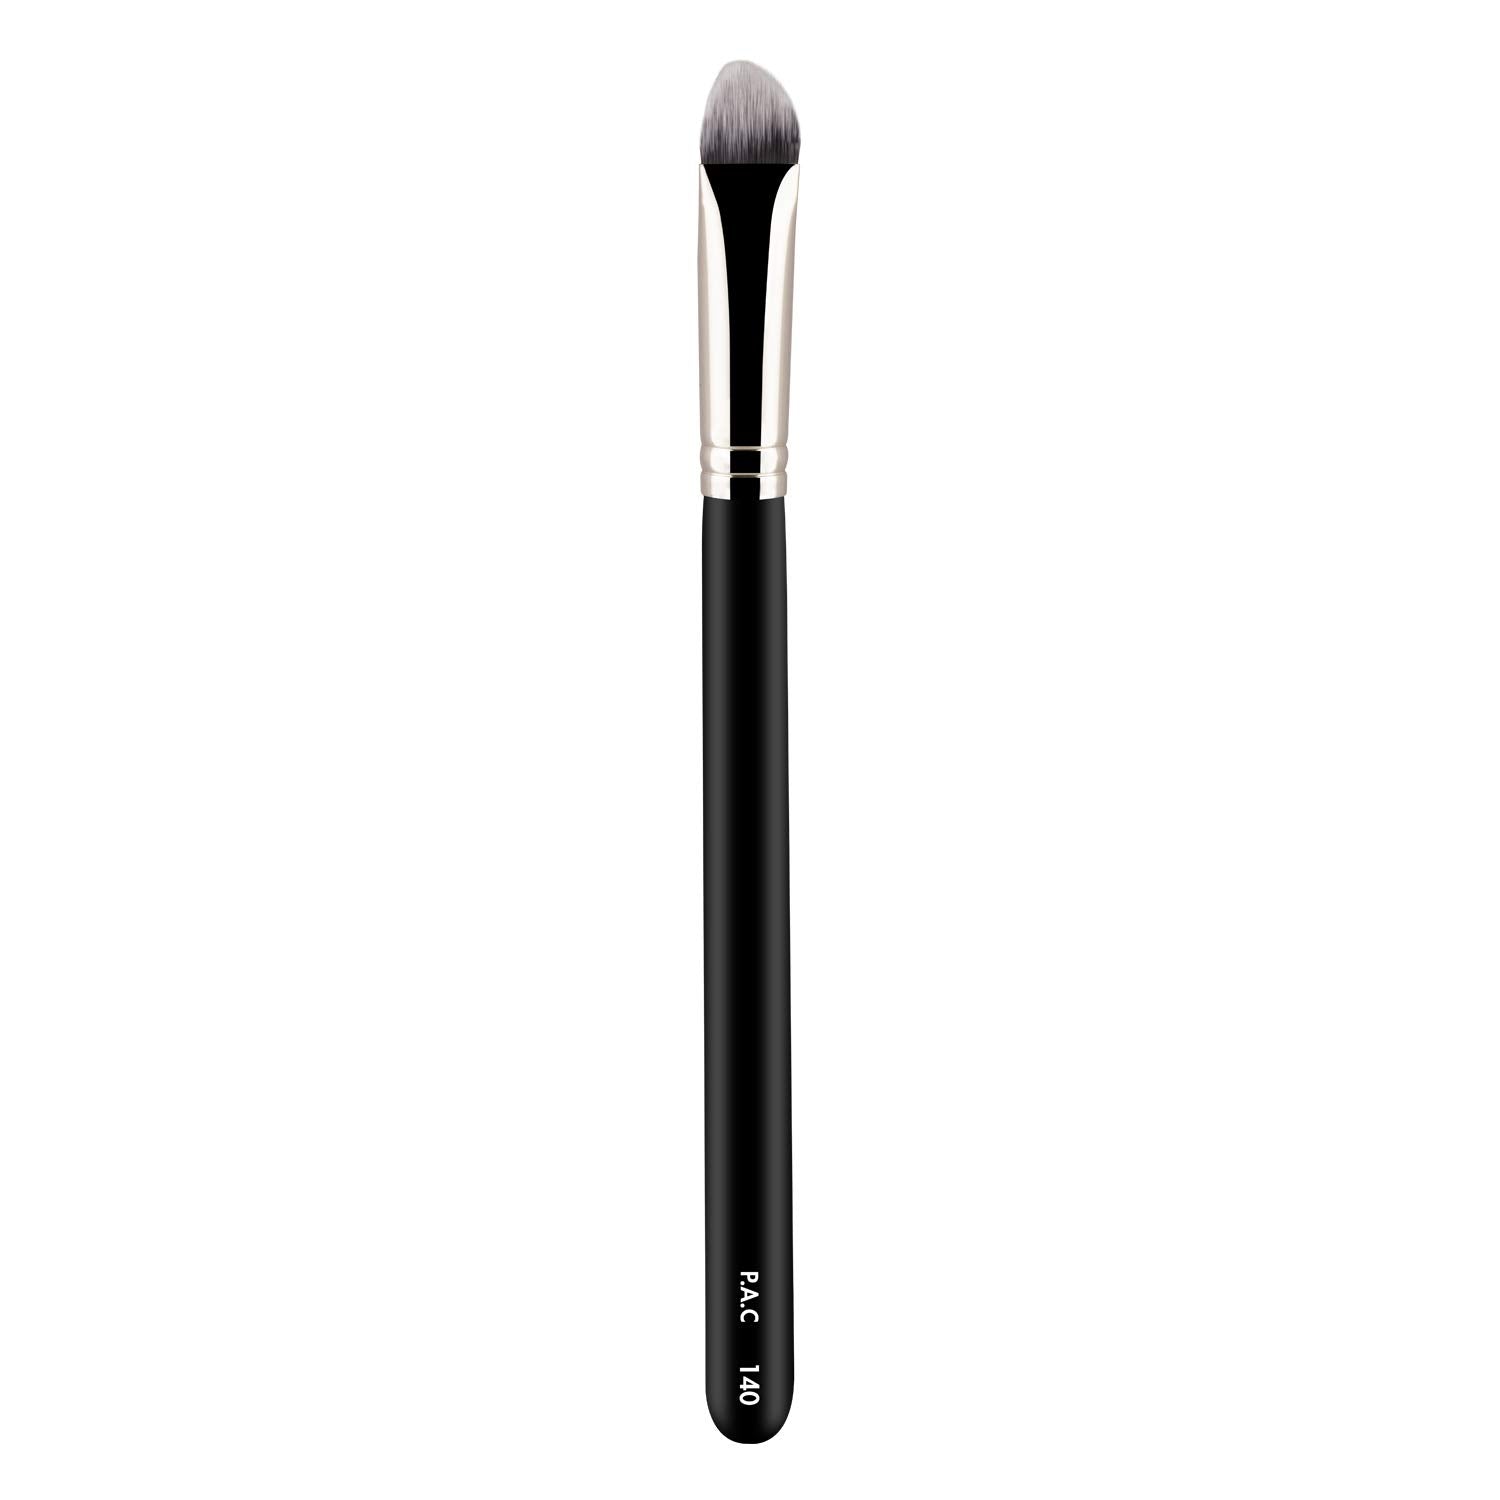 PAC Concealer Brush 140 PAC